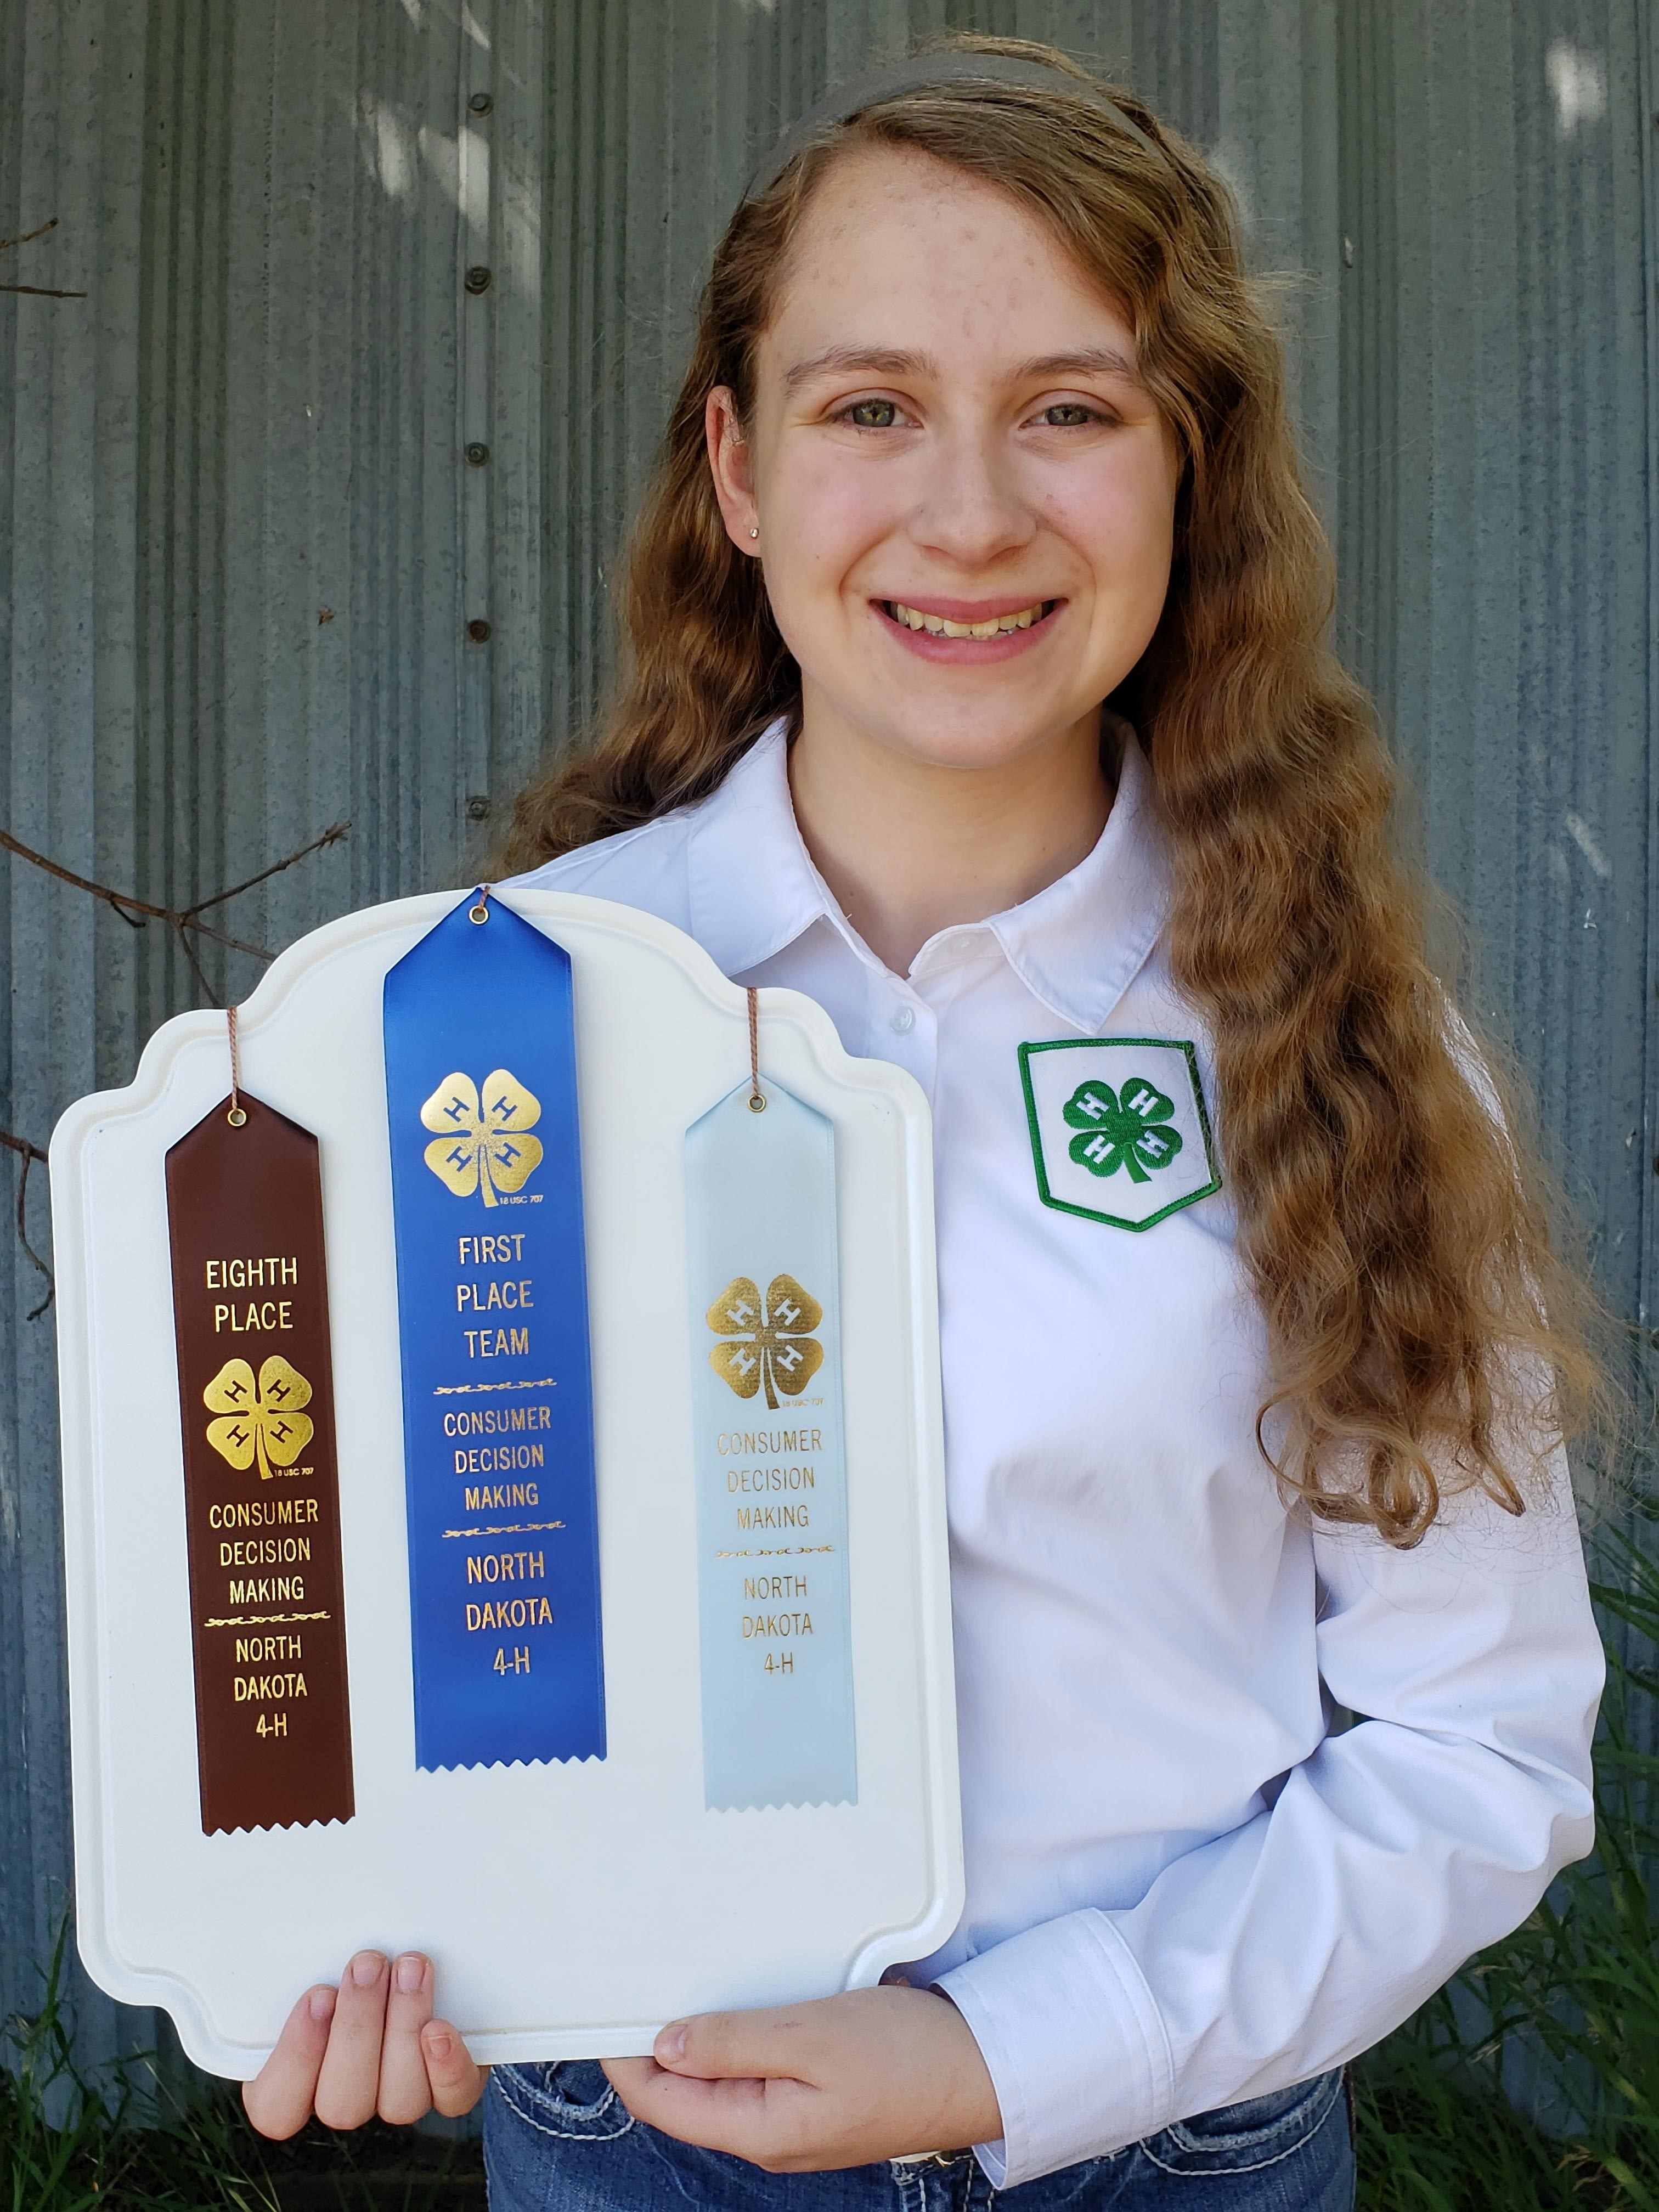 Michaela Mitchell displays the awards she received as part of the Stark-Billings County team who took first place in the 2020 North Dakota 4-H consumer decision making contest. (NDSU photo)